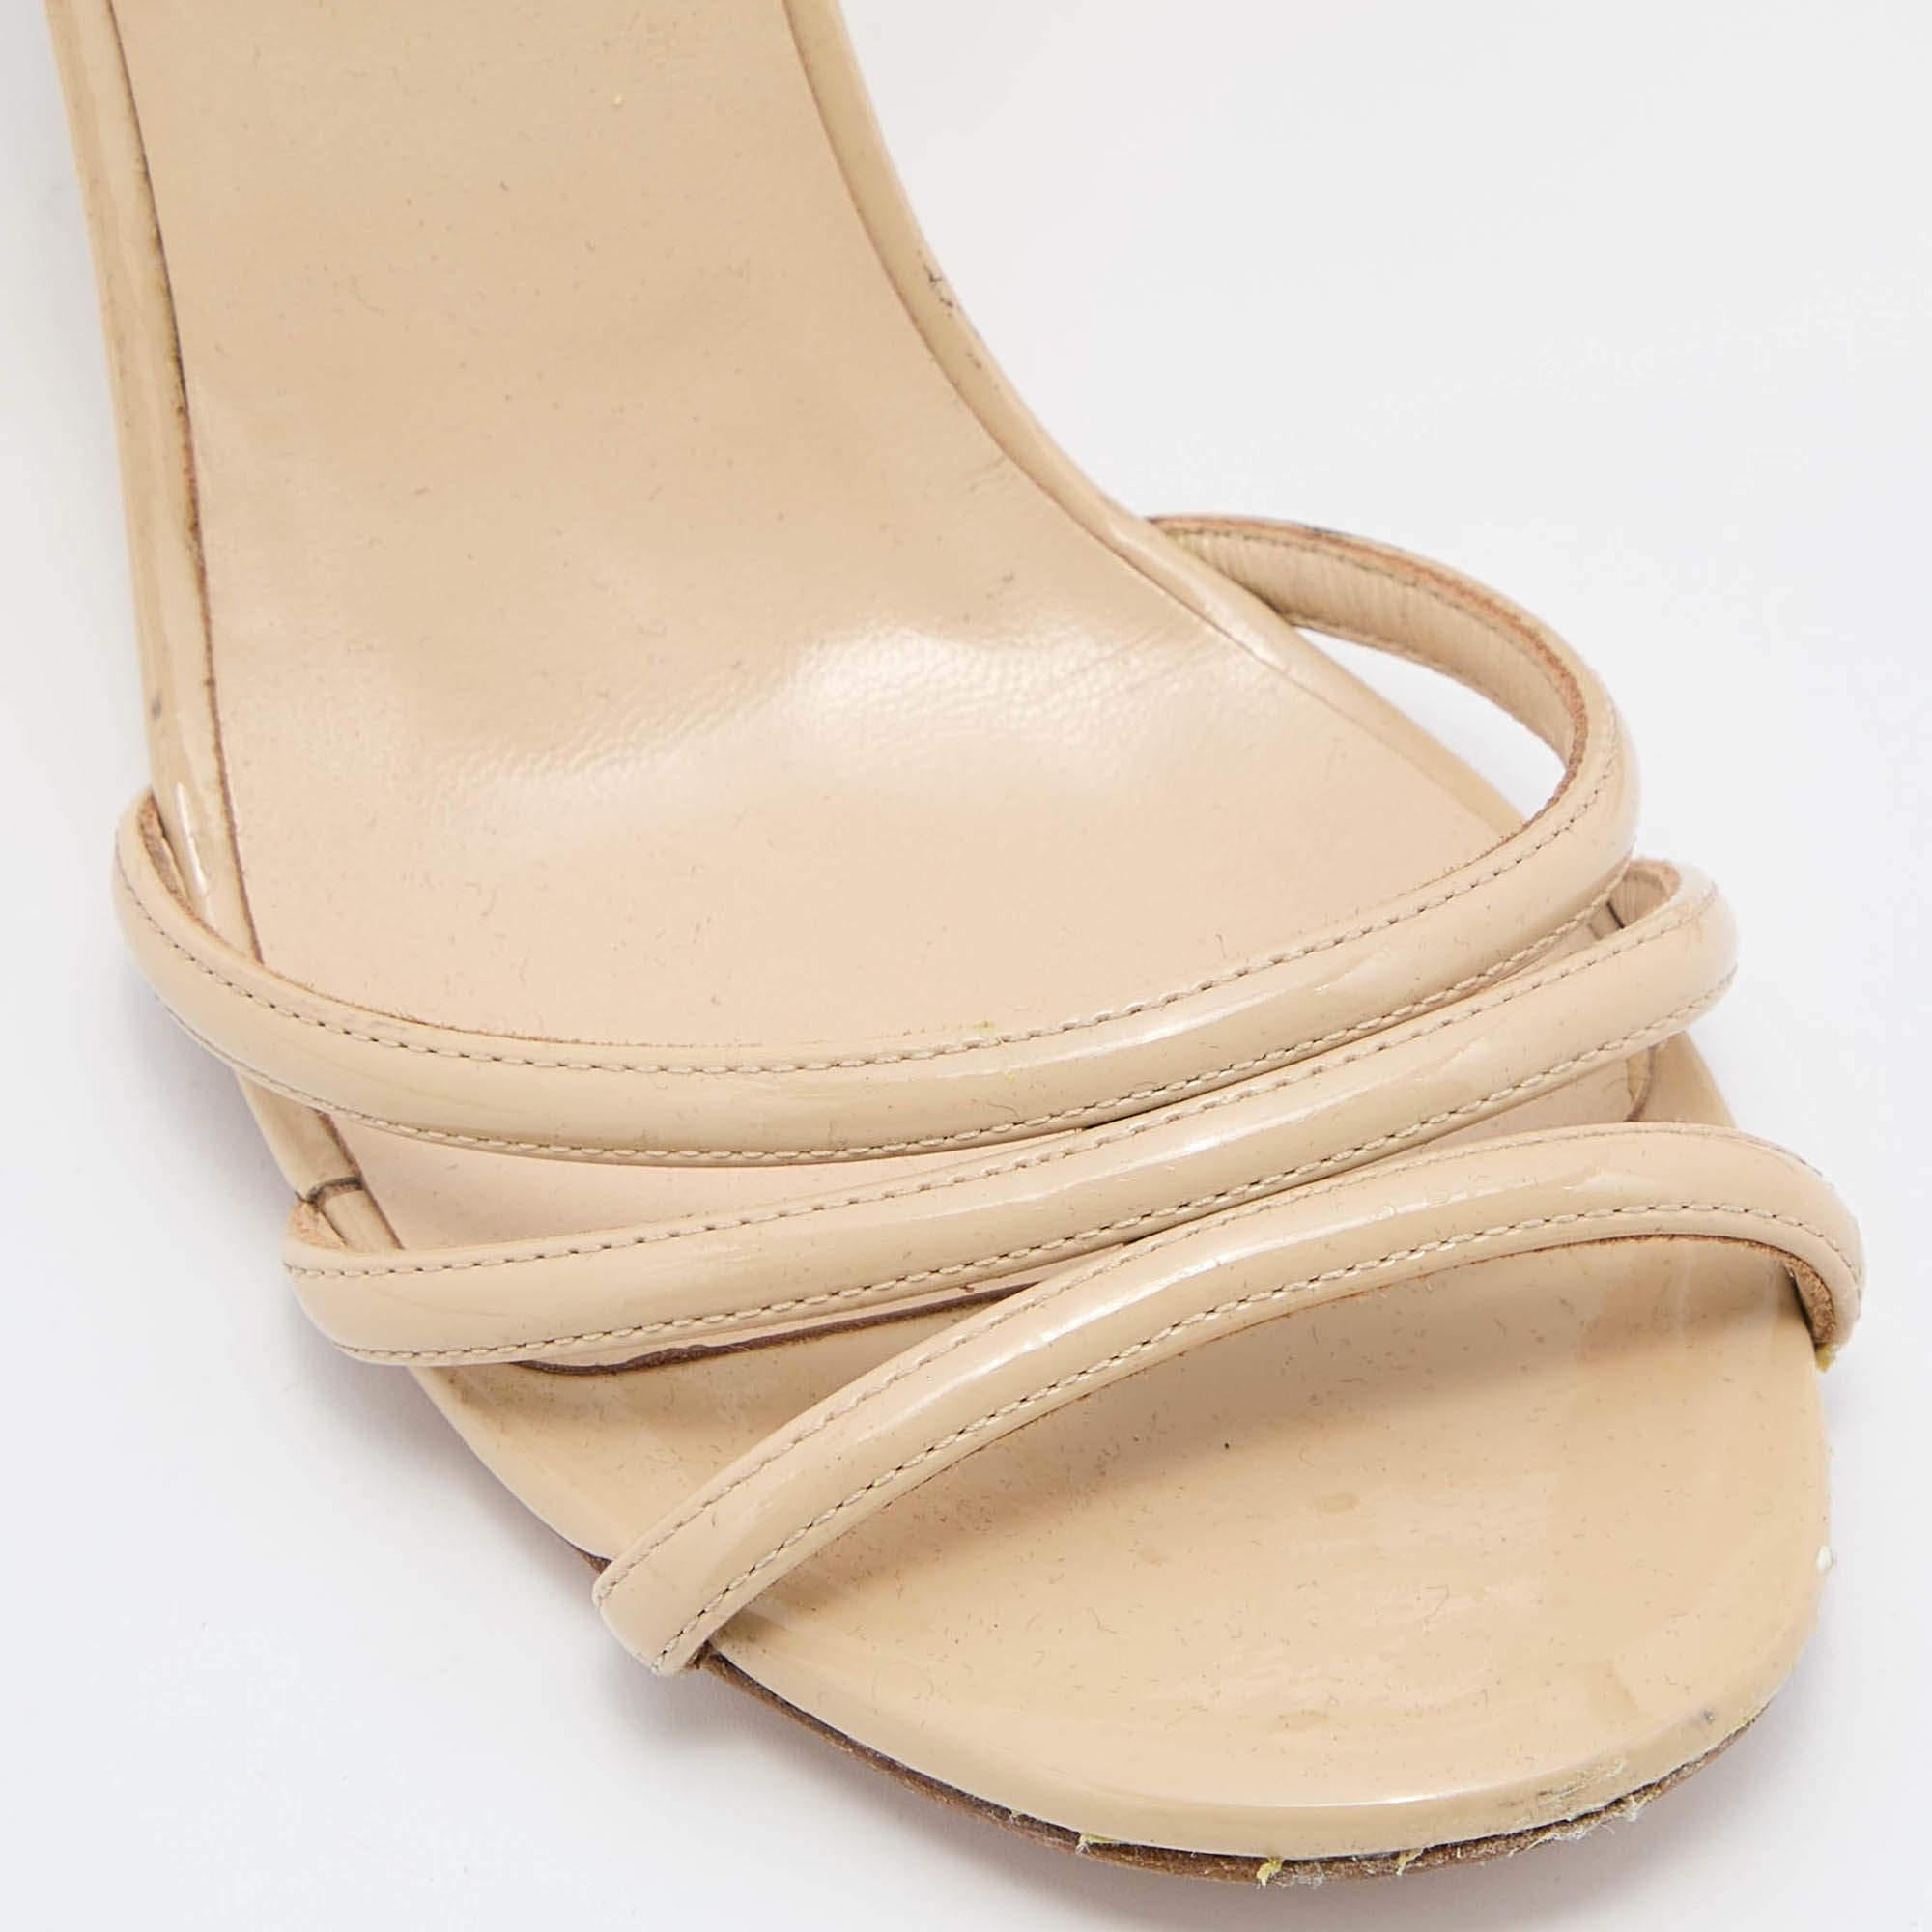 Chanel Beige Patent Leather Wedge Open Toe Sandals Size 38.5 1